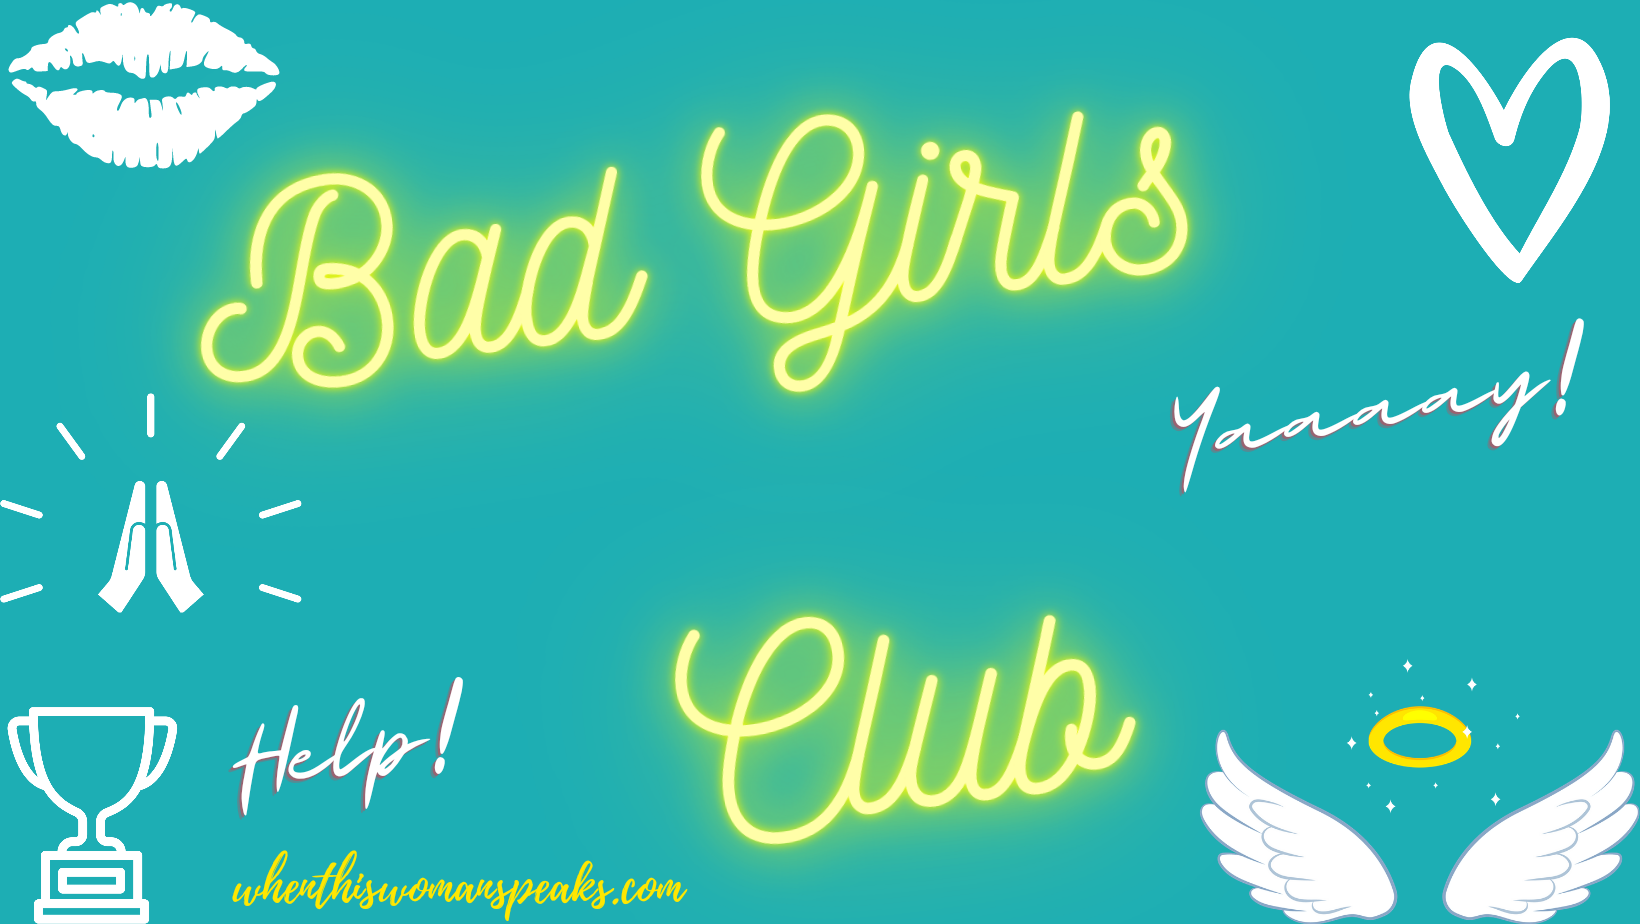 My Top 10 Bad Girls Club “Blondie’s”: The Blonde Bad Girls Who Proved They Were Bad